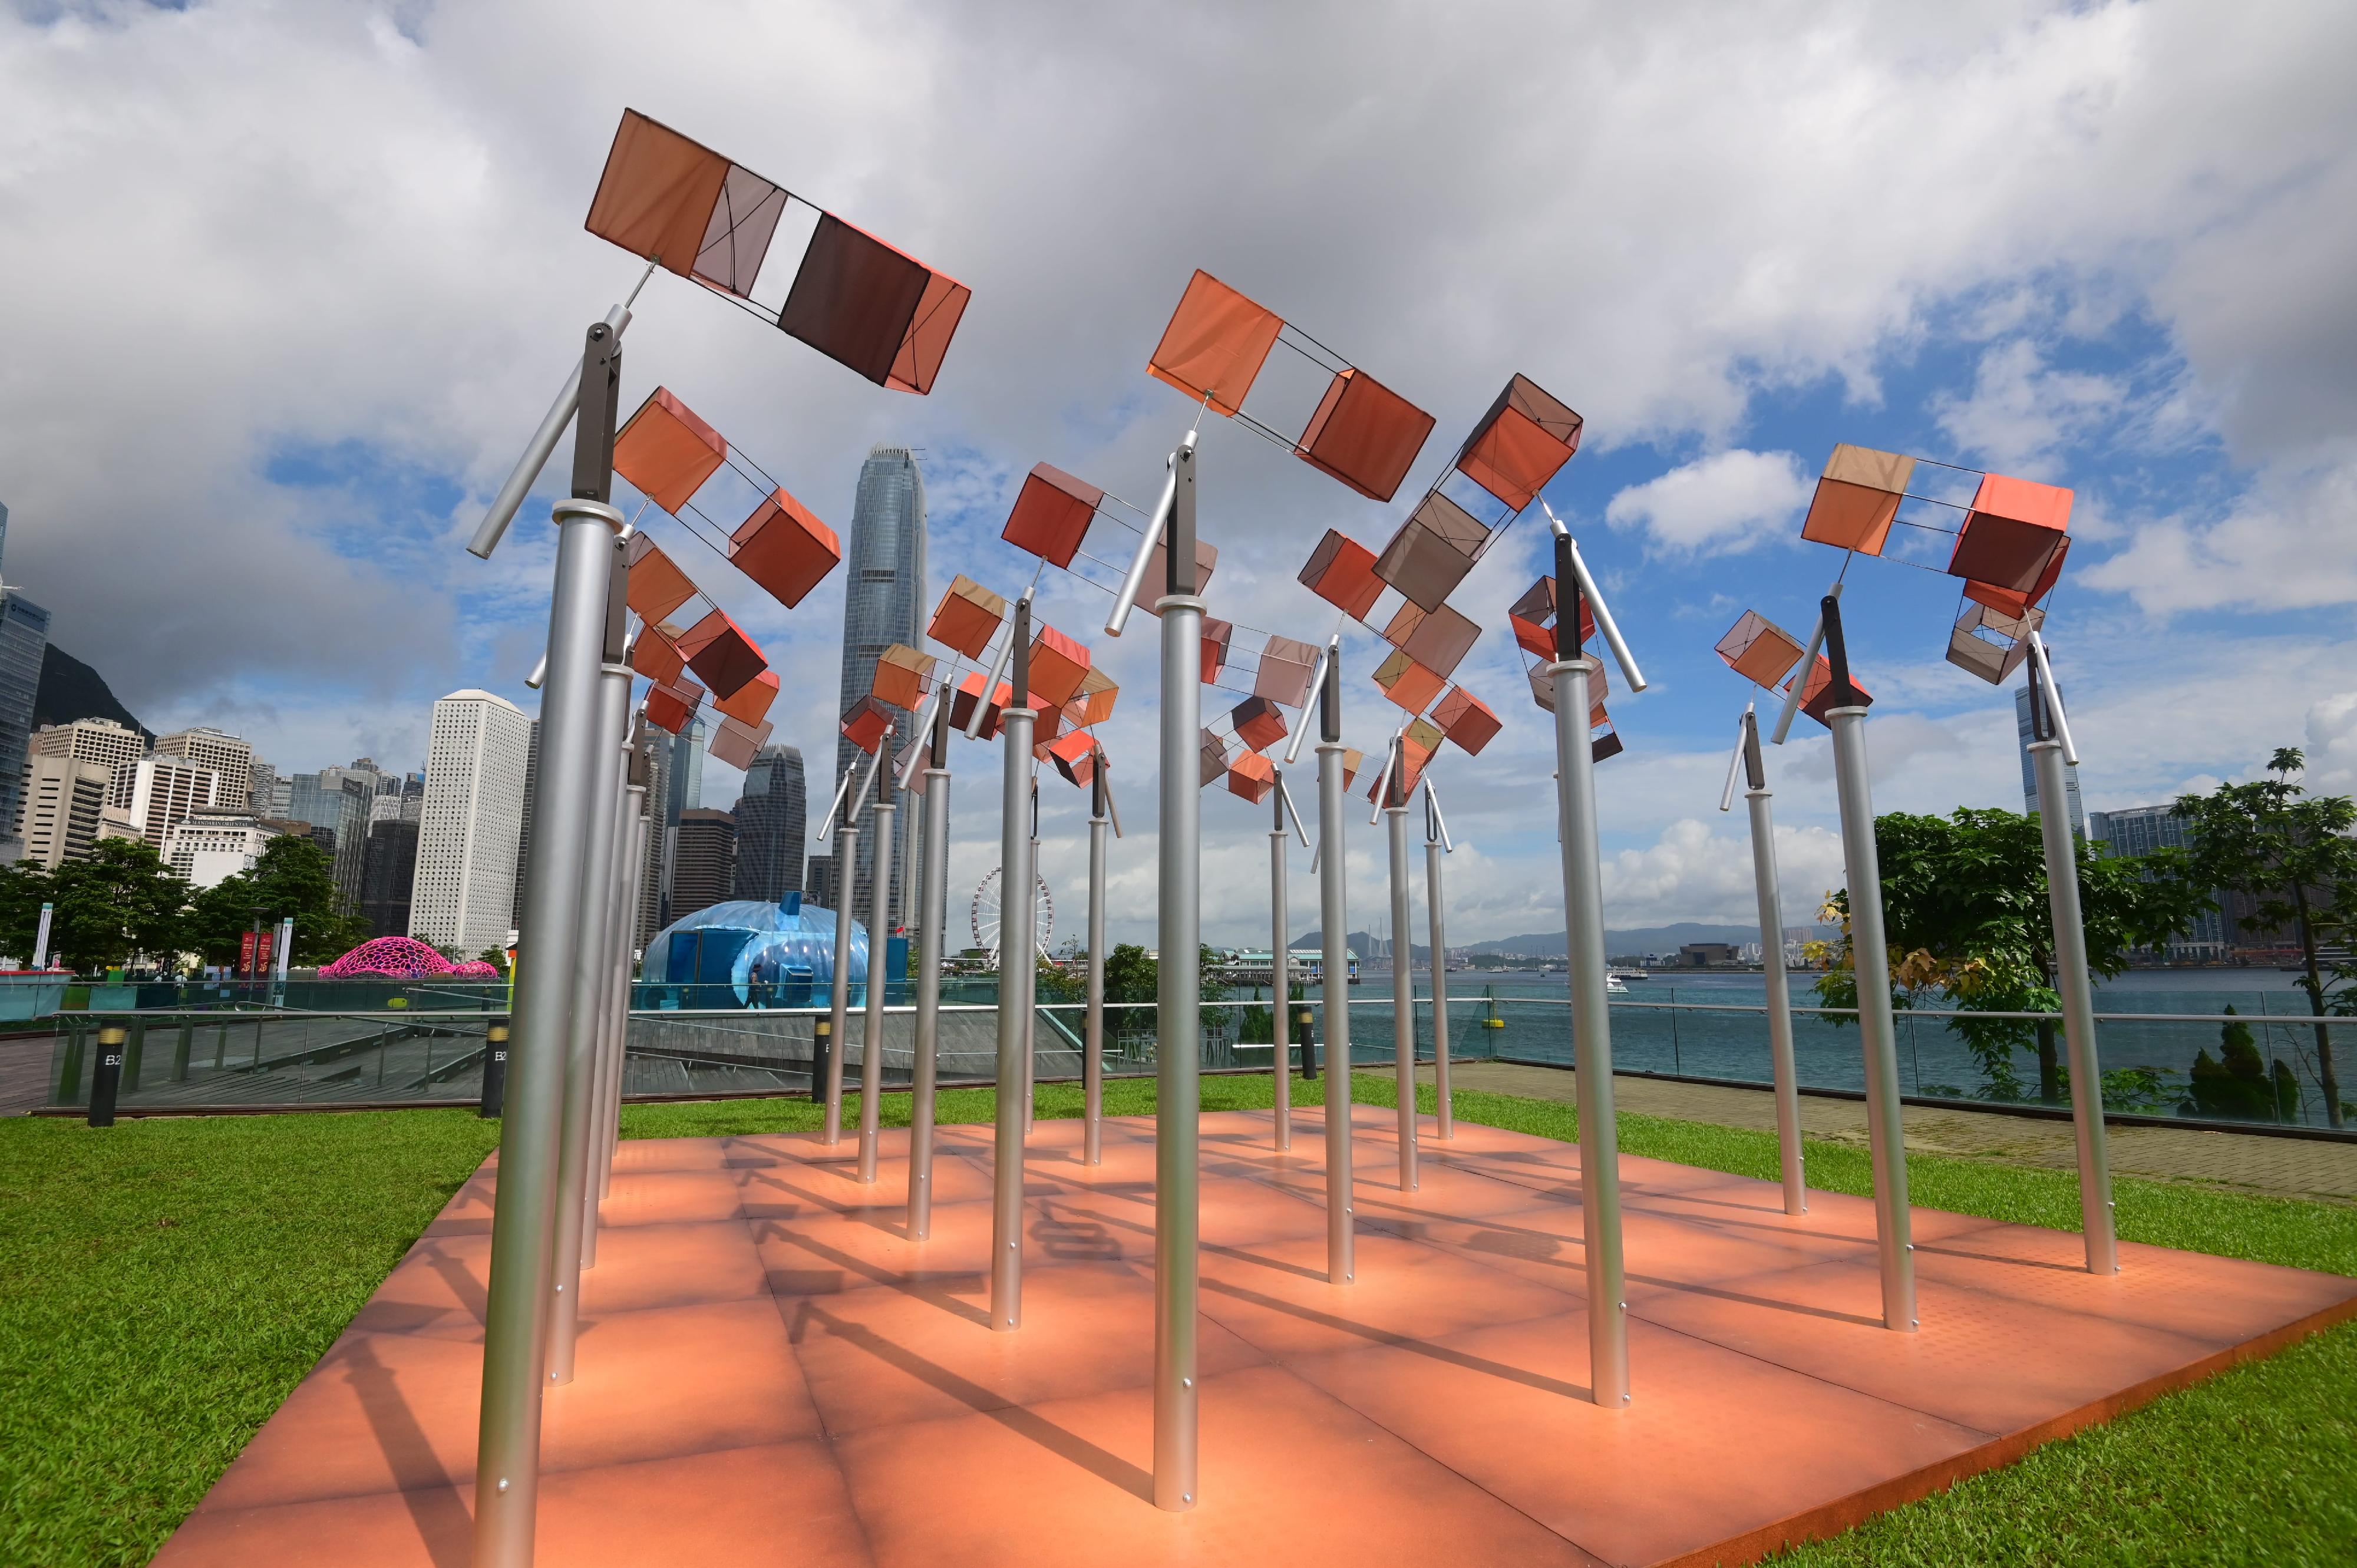 The opening ceremony of the exhibition "Art@Harbour" was held at the Central and Western District Promenade (Central Section) today (June 22). Picture shows one of the artworks, "In the Wind", under "The Hong Kong Jockey Club Series: Science in Art".